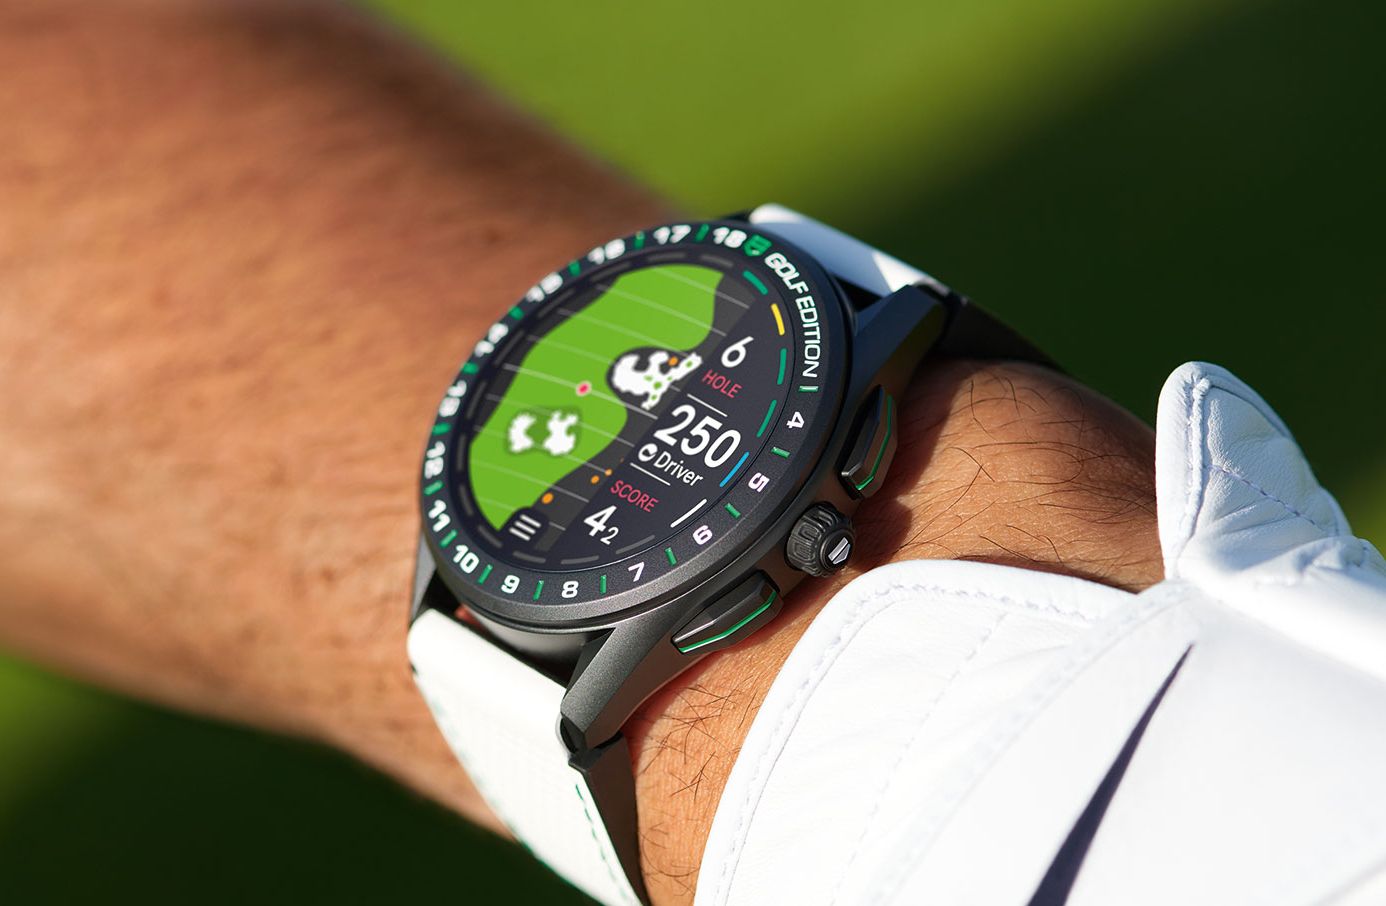 New products: GPS golf watch helps you plan your game